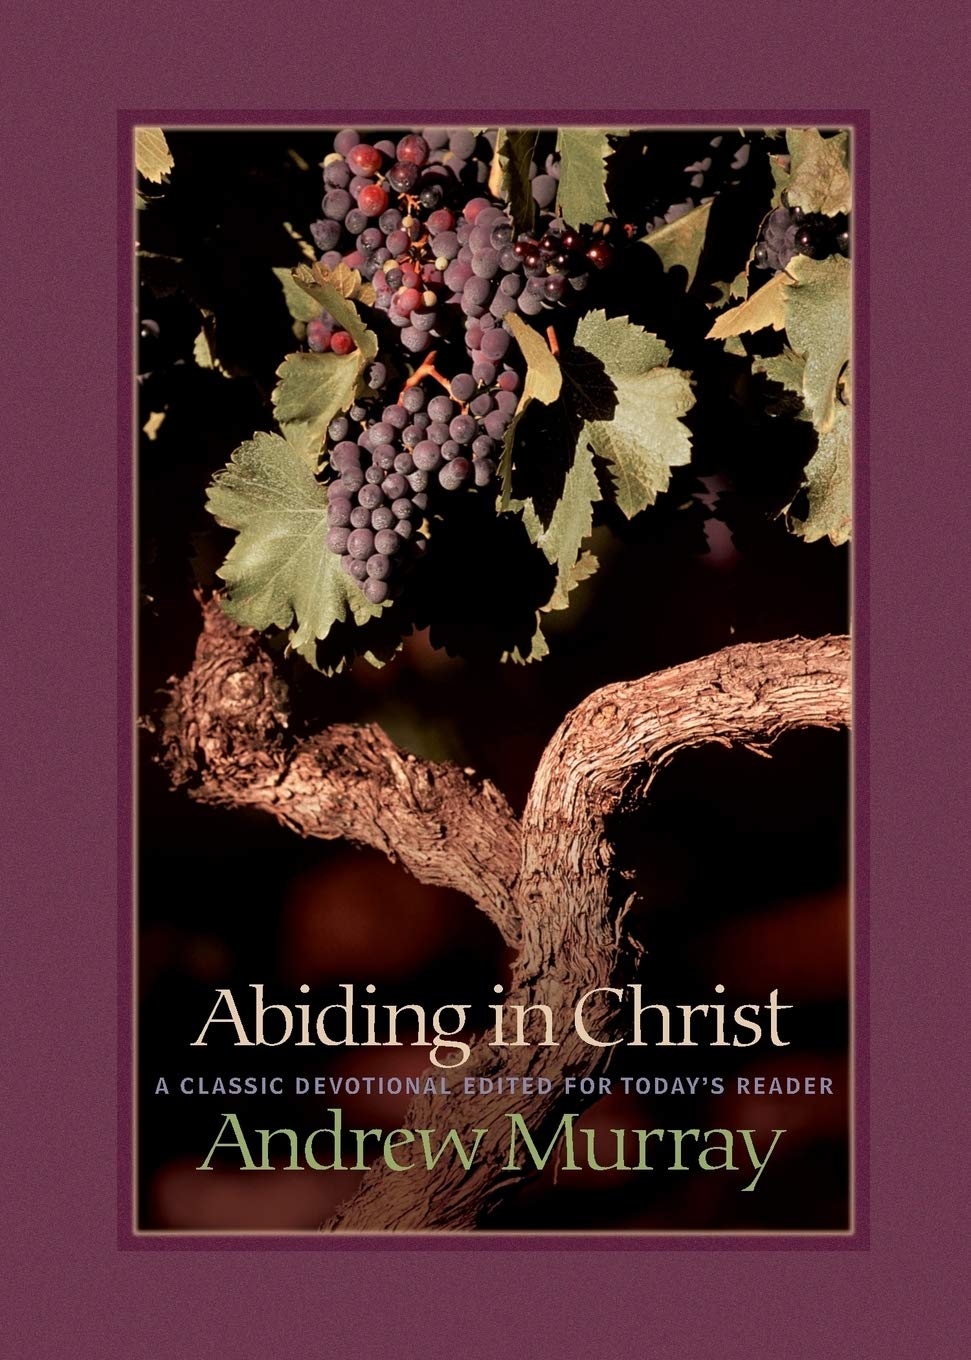 Abiding in Christ by Andrew Murray